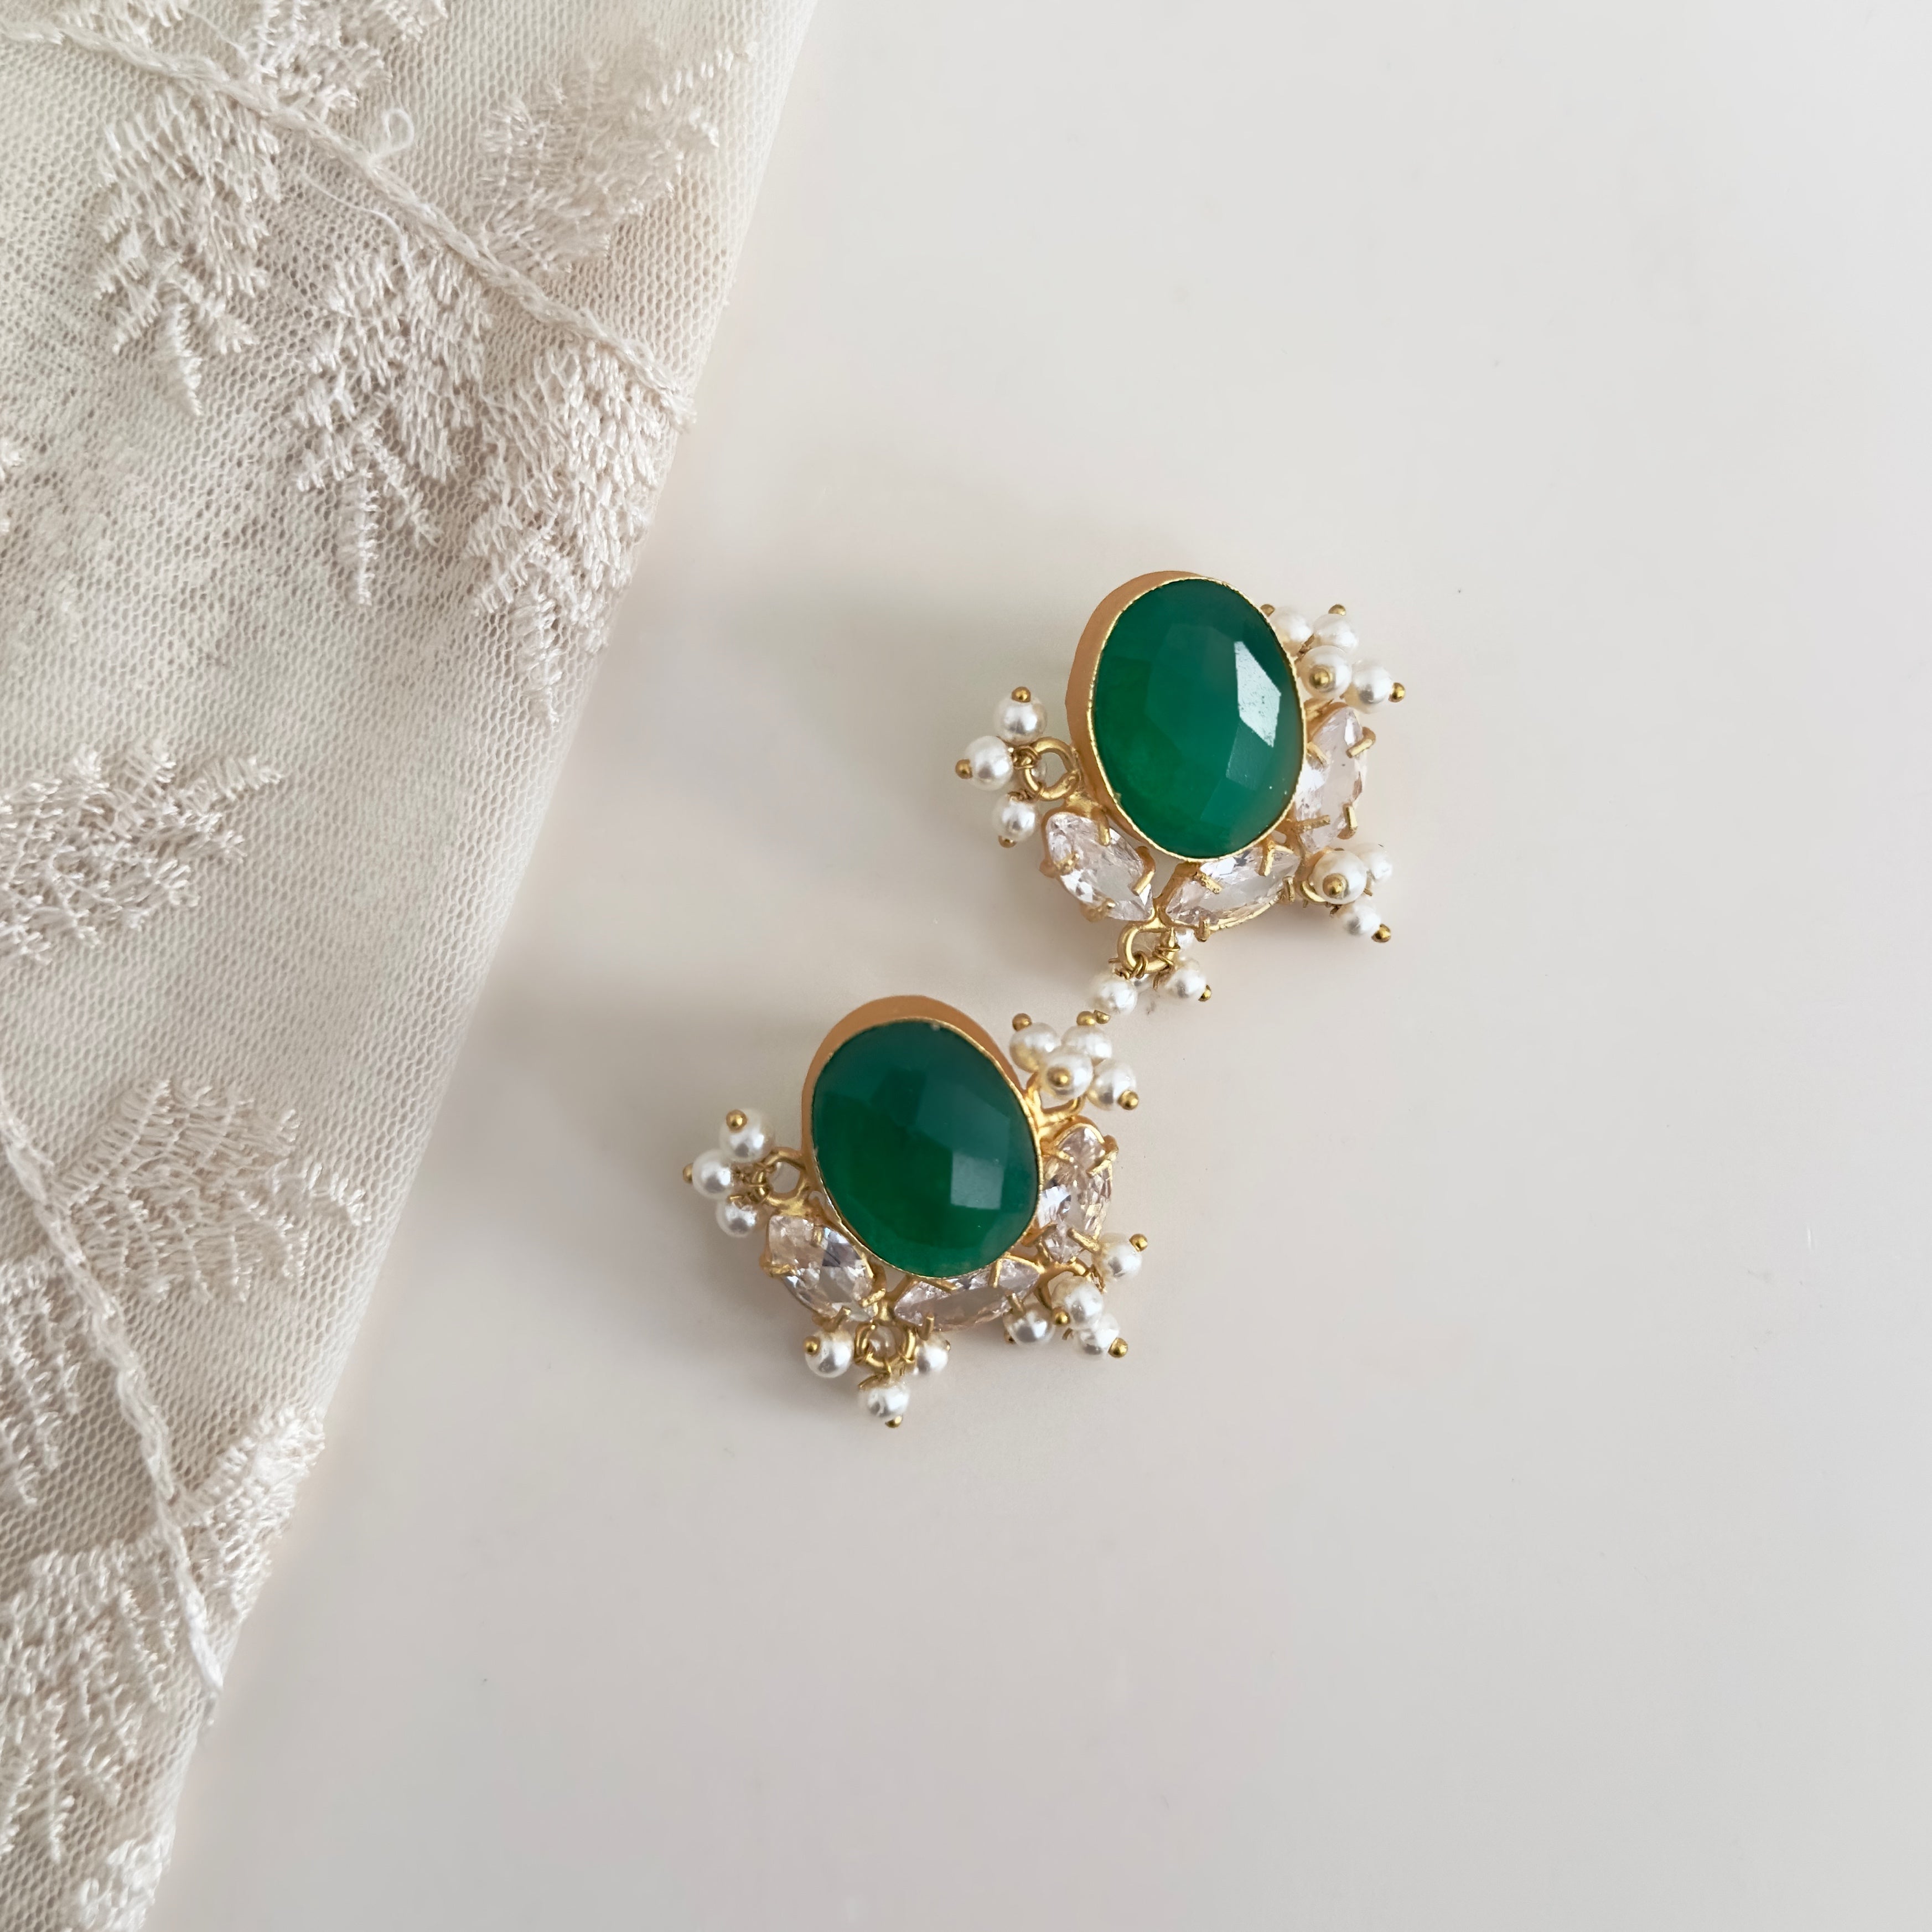 Add a pop of color to your outfit with our Classic Green Crystal Stud Earrings. The vibrant green stones are beautifully accented with cz crystals, adding a touch of sparkle to the classic design. Elevate your look with these elegant earrings.<br>Earring drop 3cm<br>Depth of stone will vary